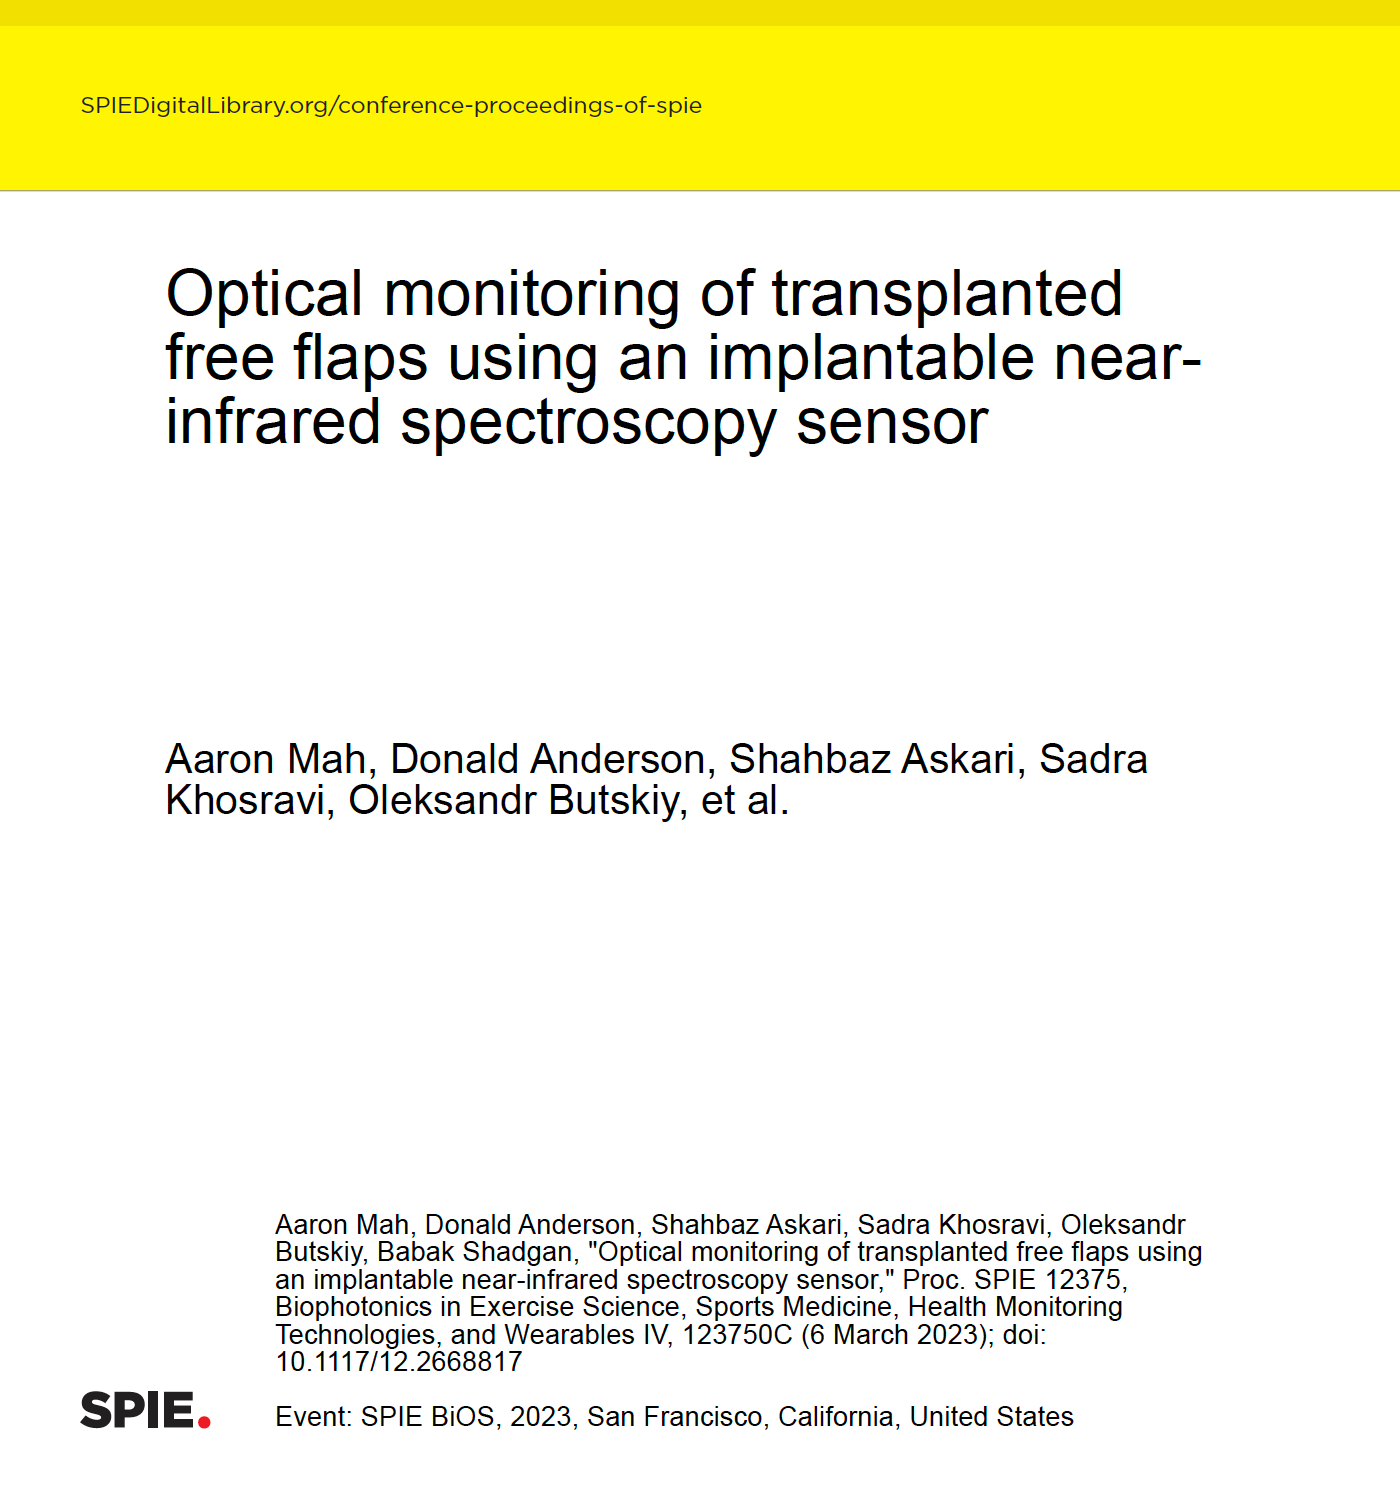 New Publication: Optical monitoring of transplanted free flaps using an implantable near-infrared spectroscopy sensor